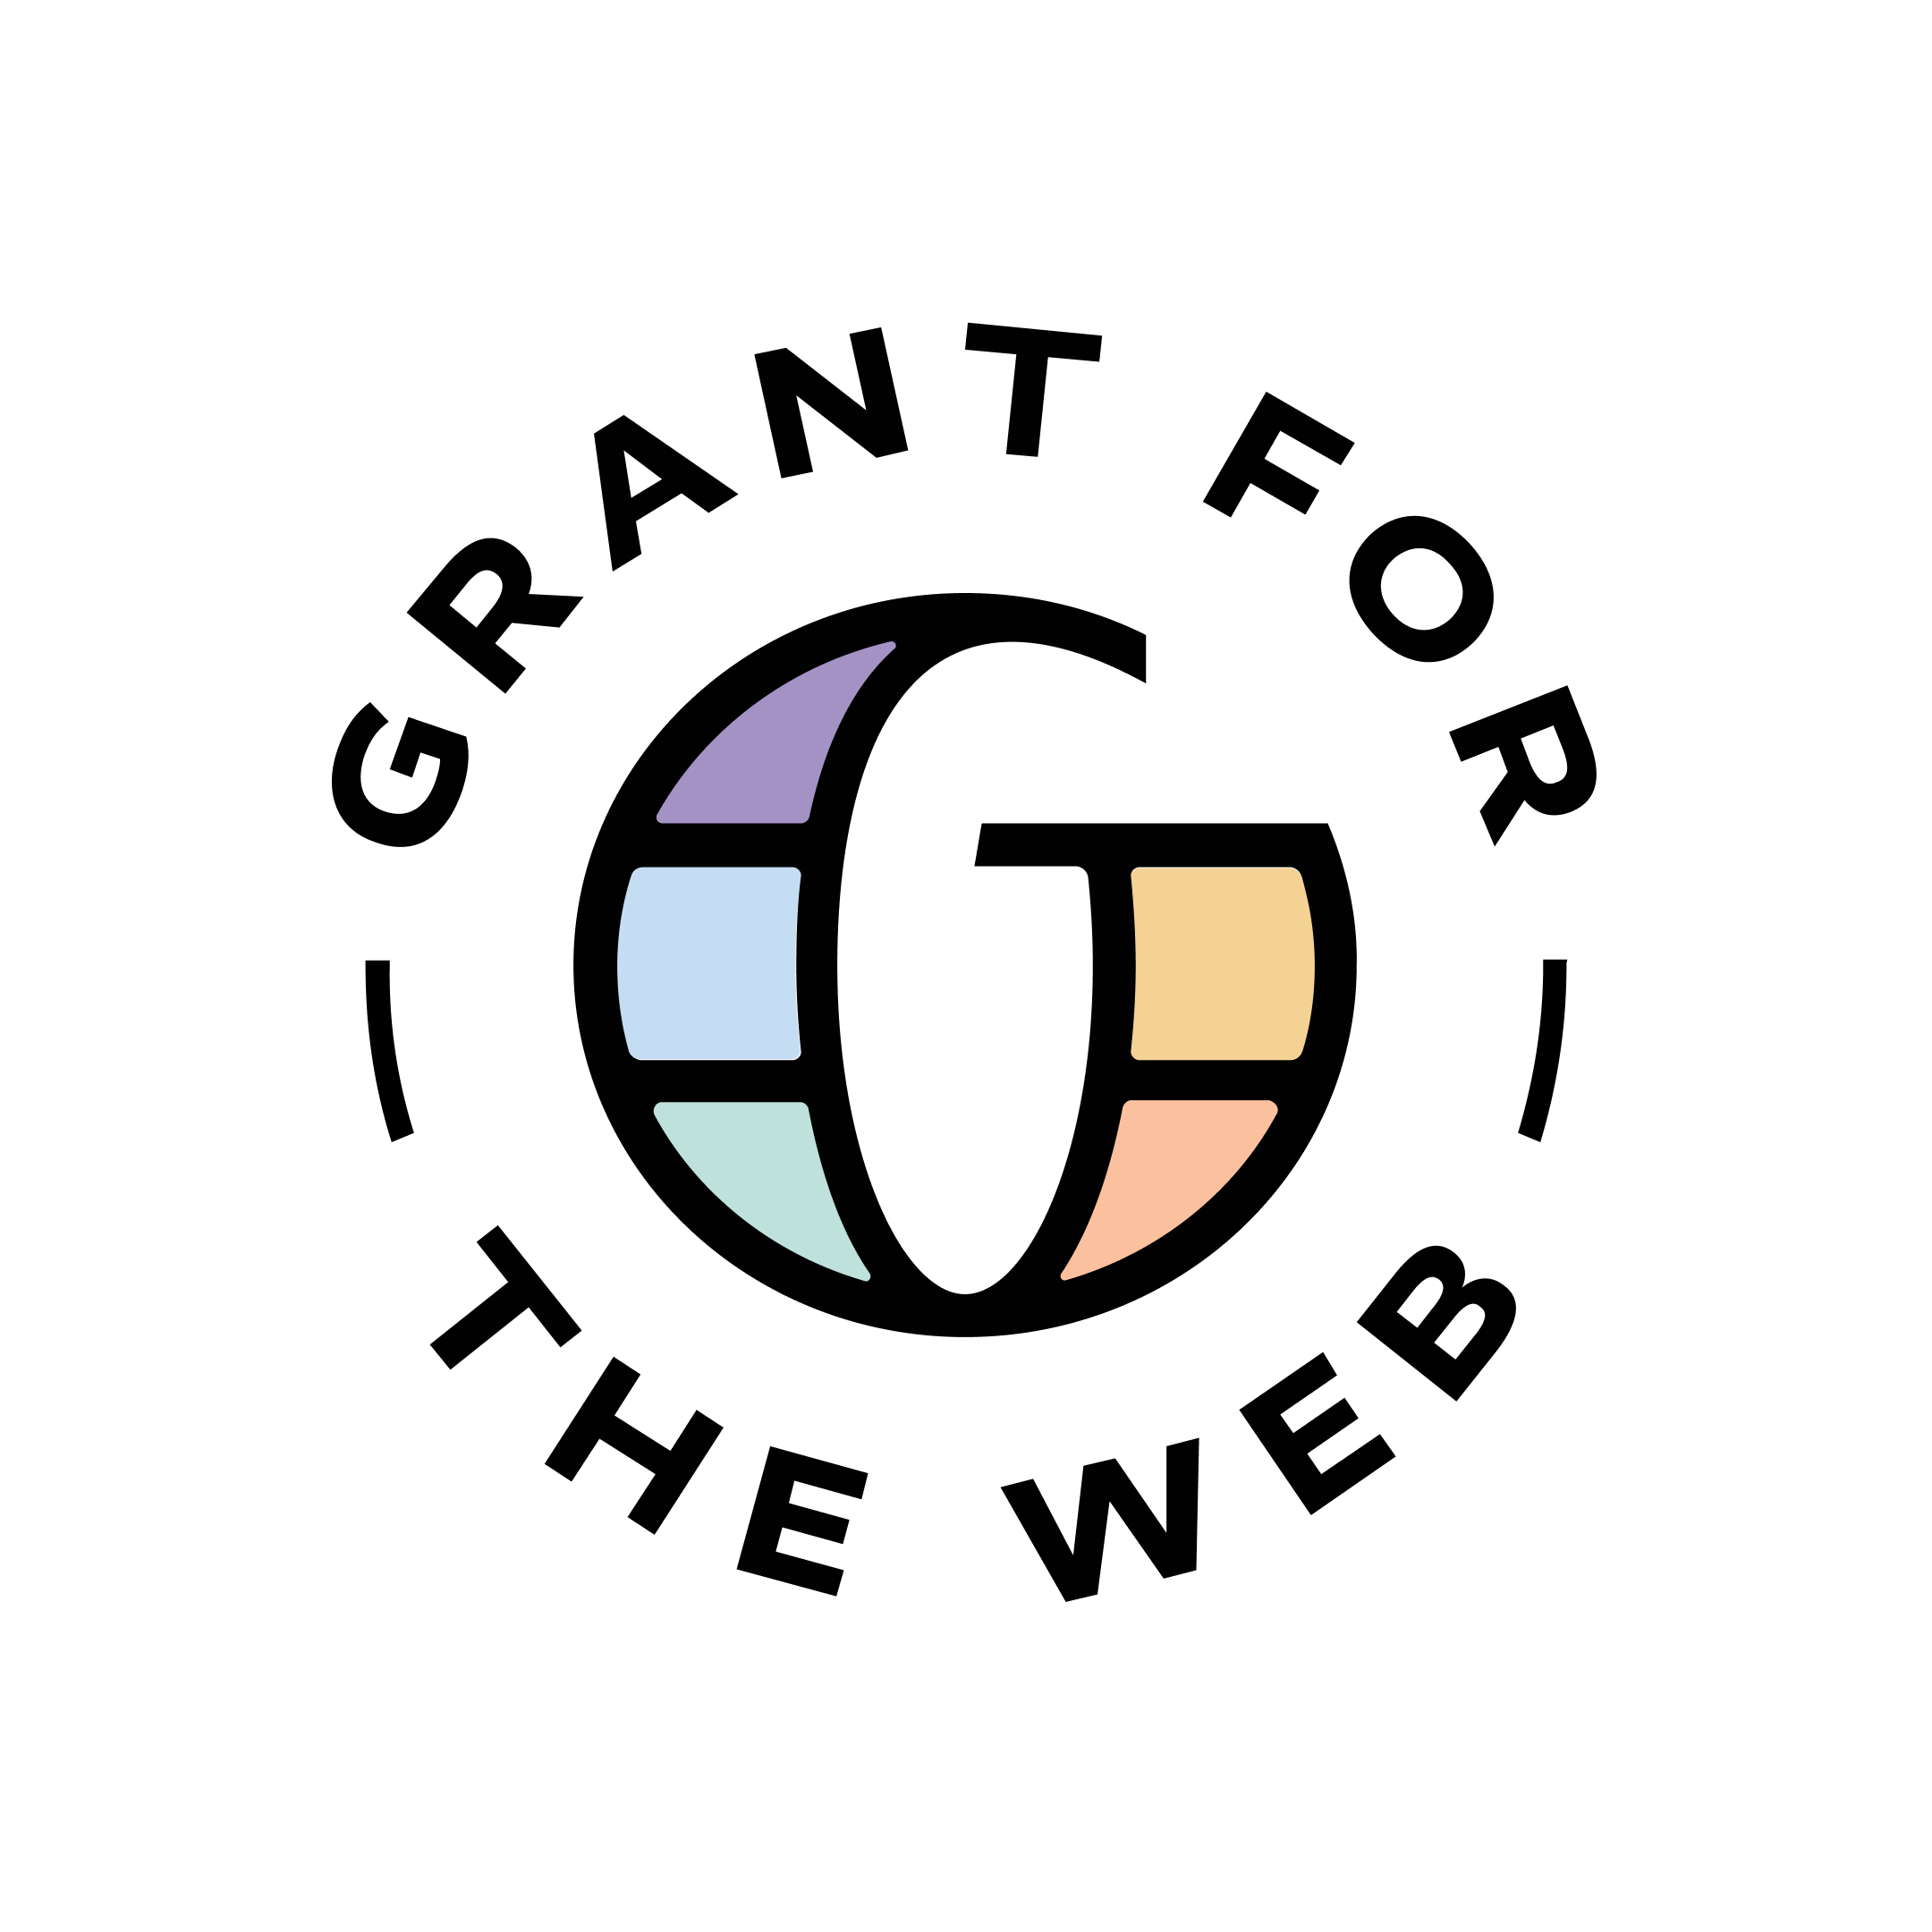 Seeding Innovation with Grant for the Web